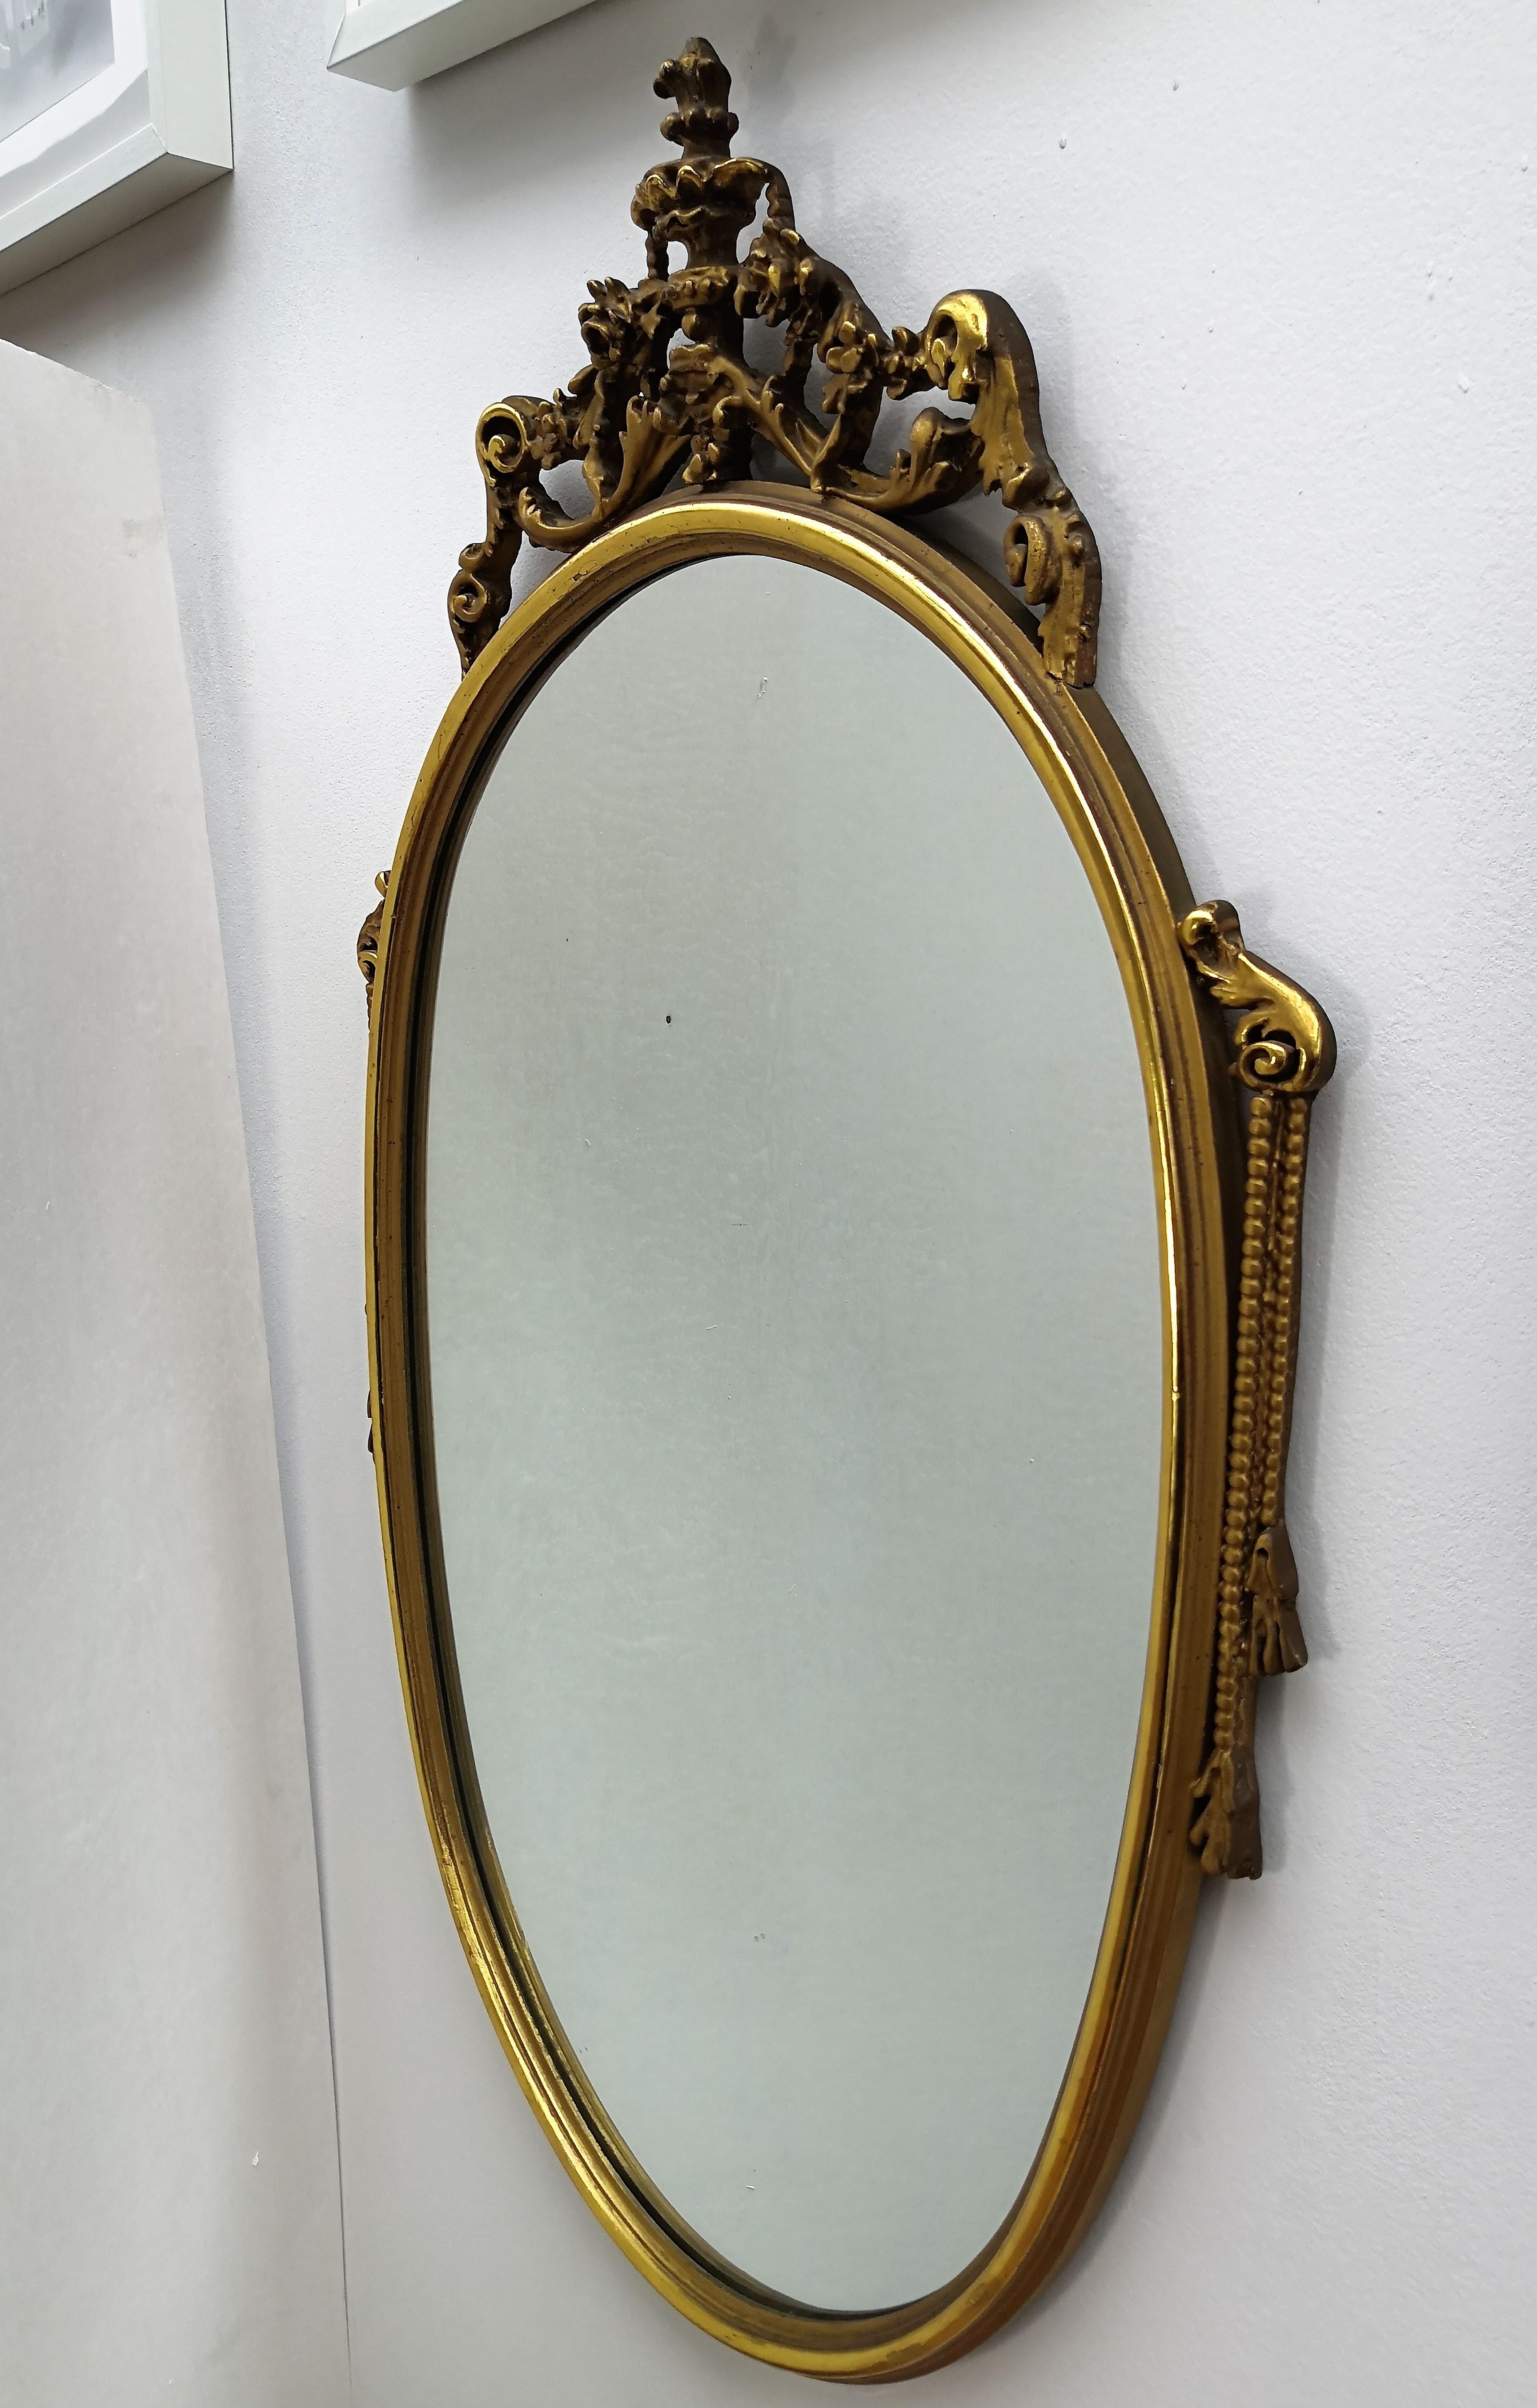 1960s Italian Ornate Carved Giltwood Oval Wall Mirror 1